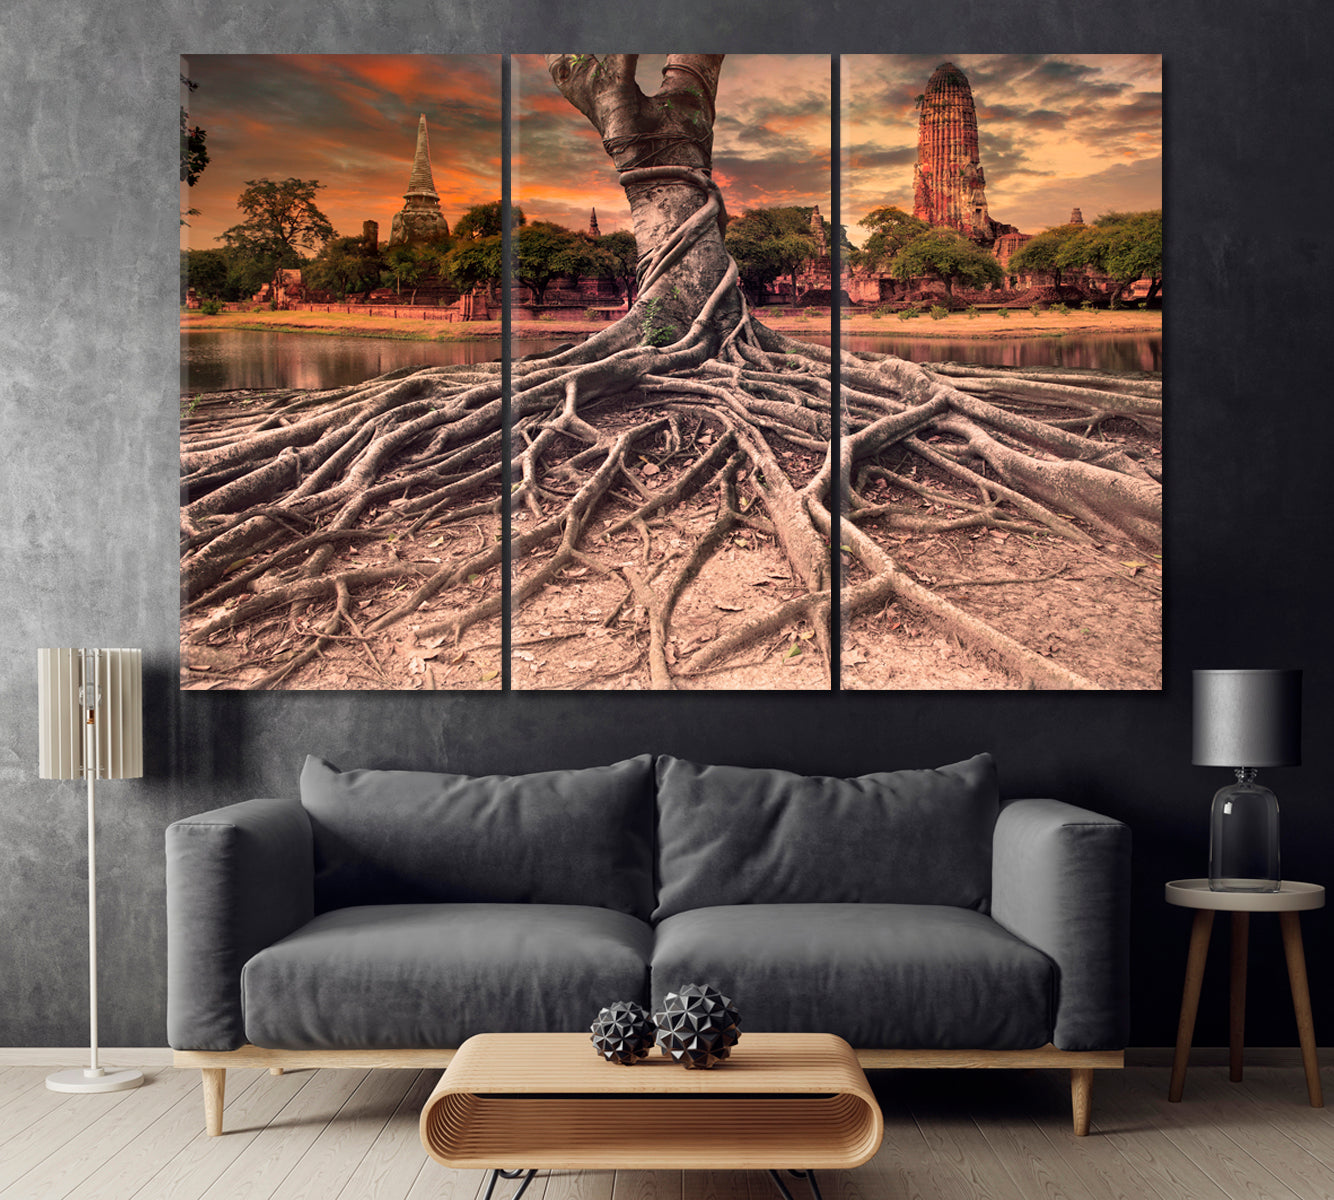 Root of Banyan Tree and Temple of Ayutthaya Canvas Print ArtLexy 3 Panels 36"x24" inches 